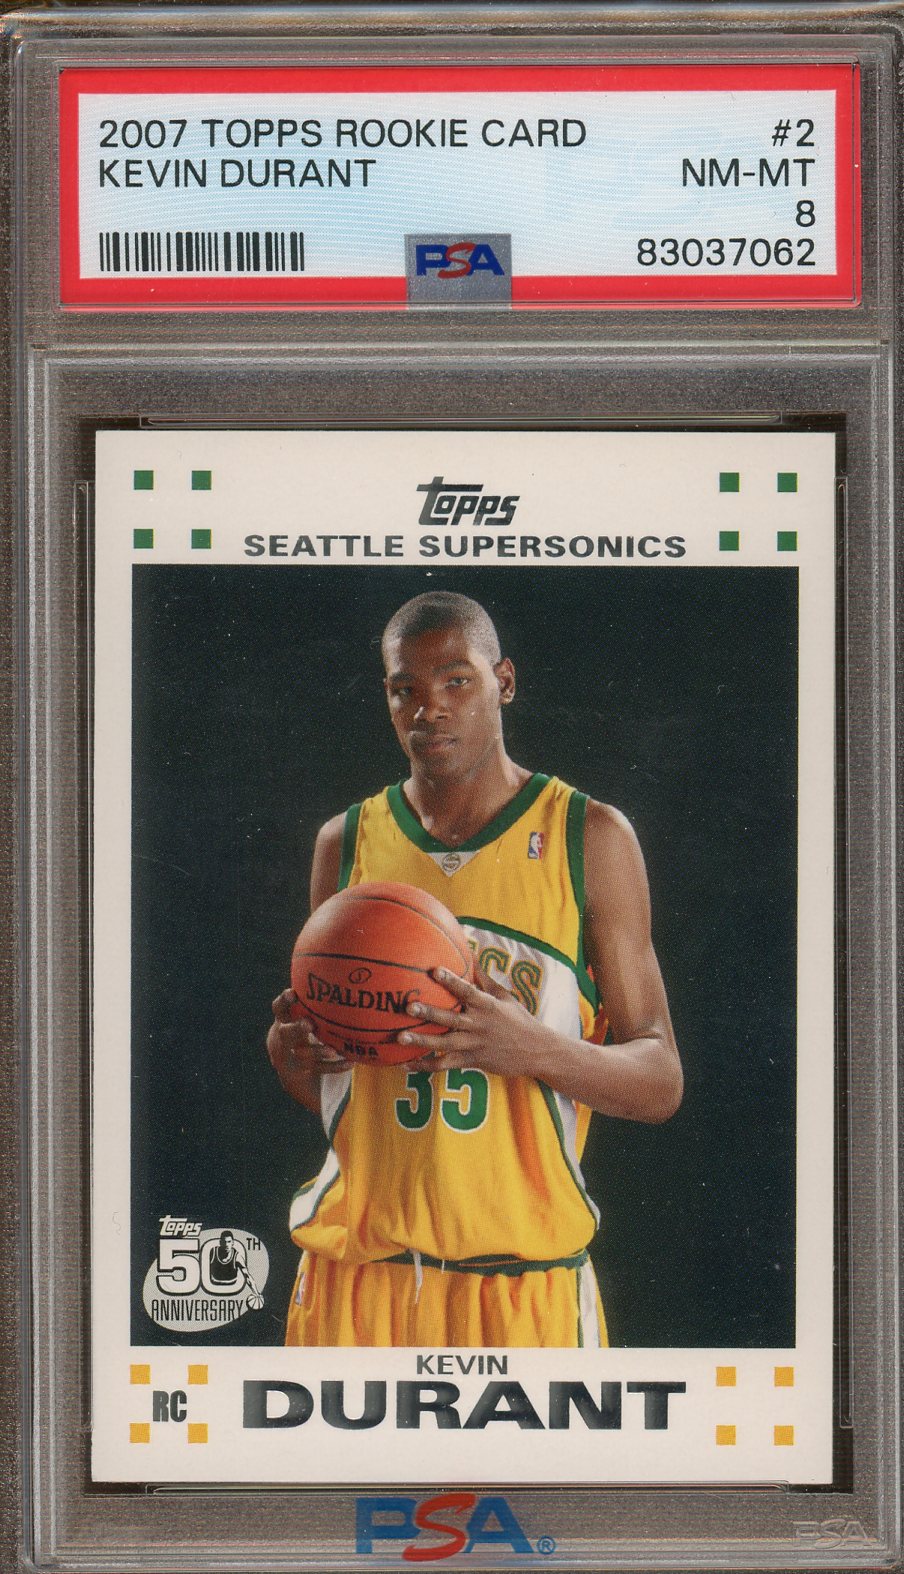 PSA - NM-MT 8 - 2007 - Topps - Rookie Card - Kevin Durant